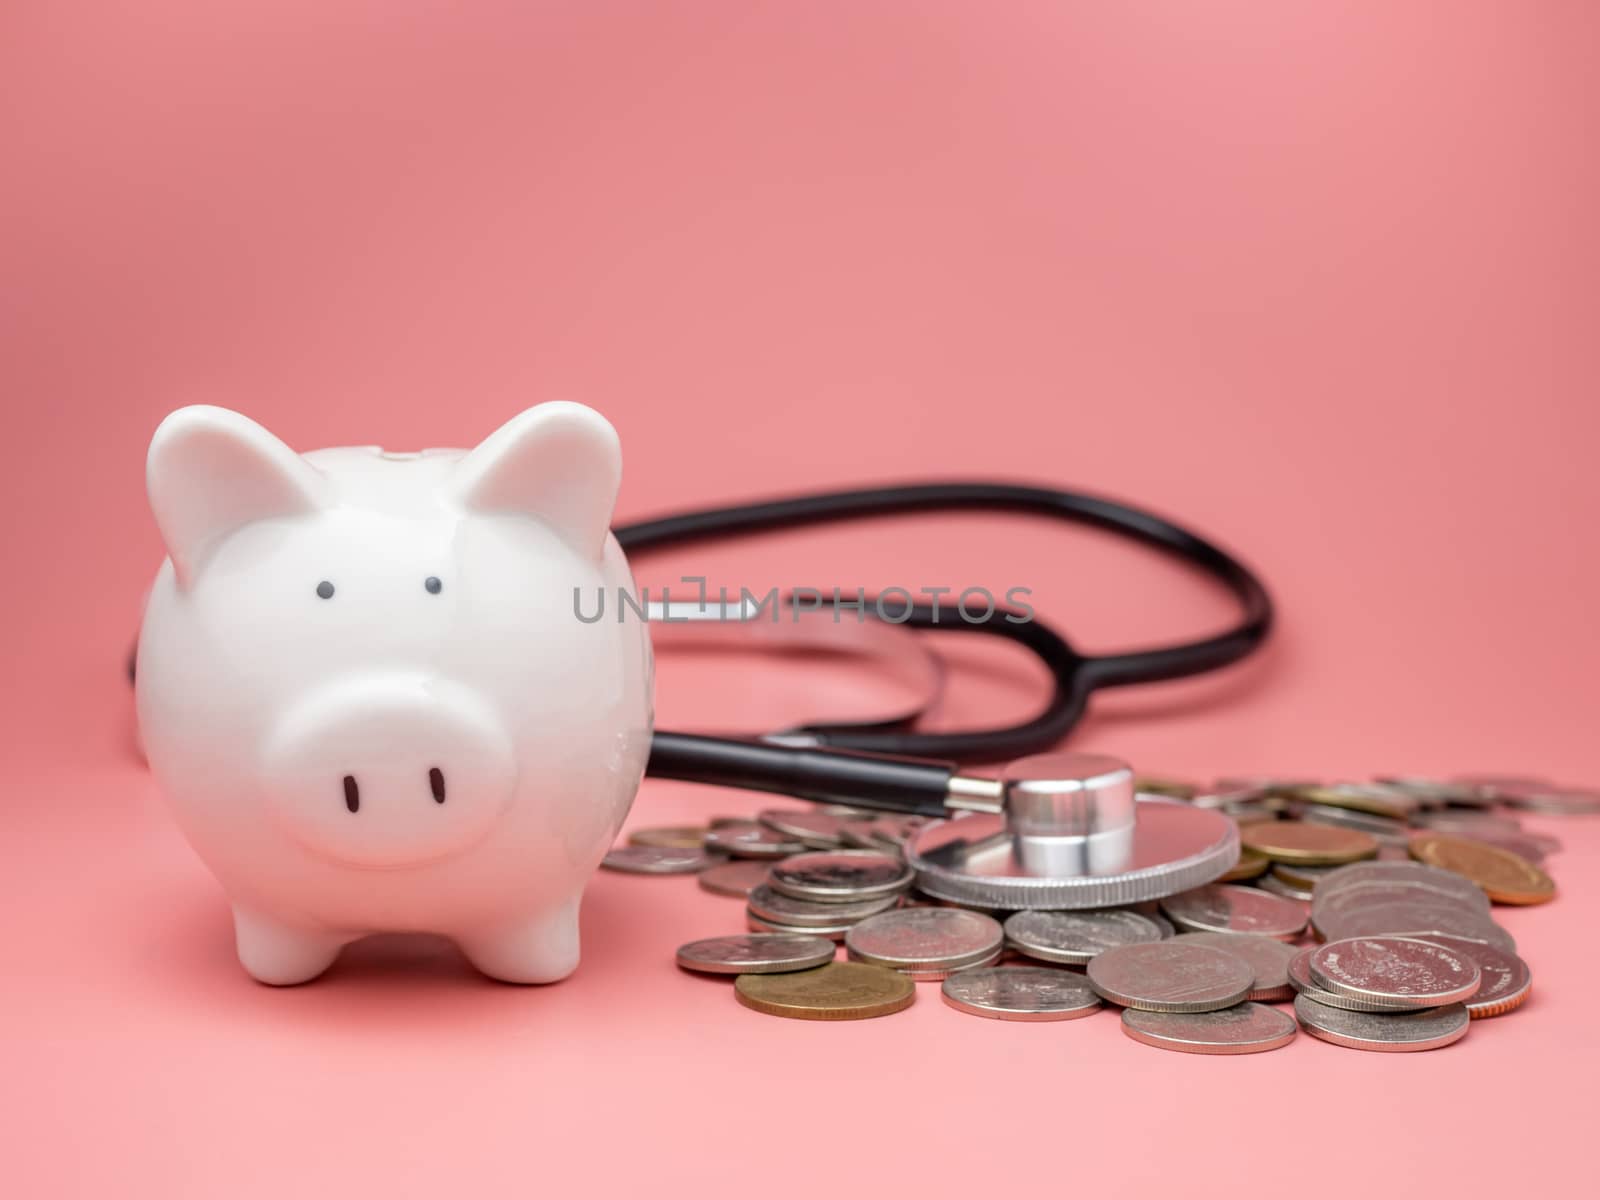 Stethoscope on the pile of money and piggy bank on pink backgrou by Unimages2527